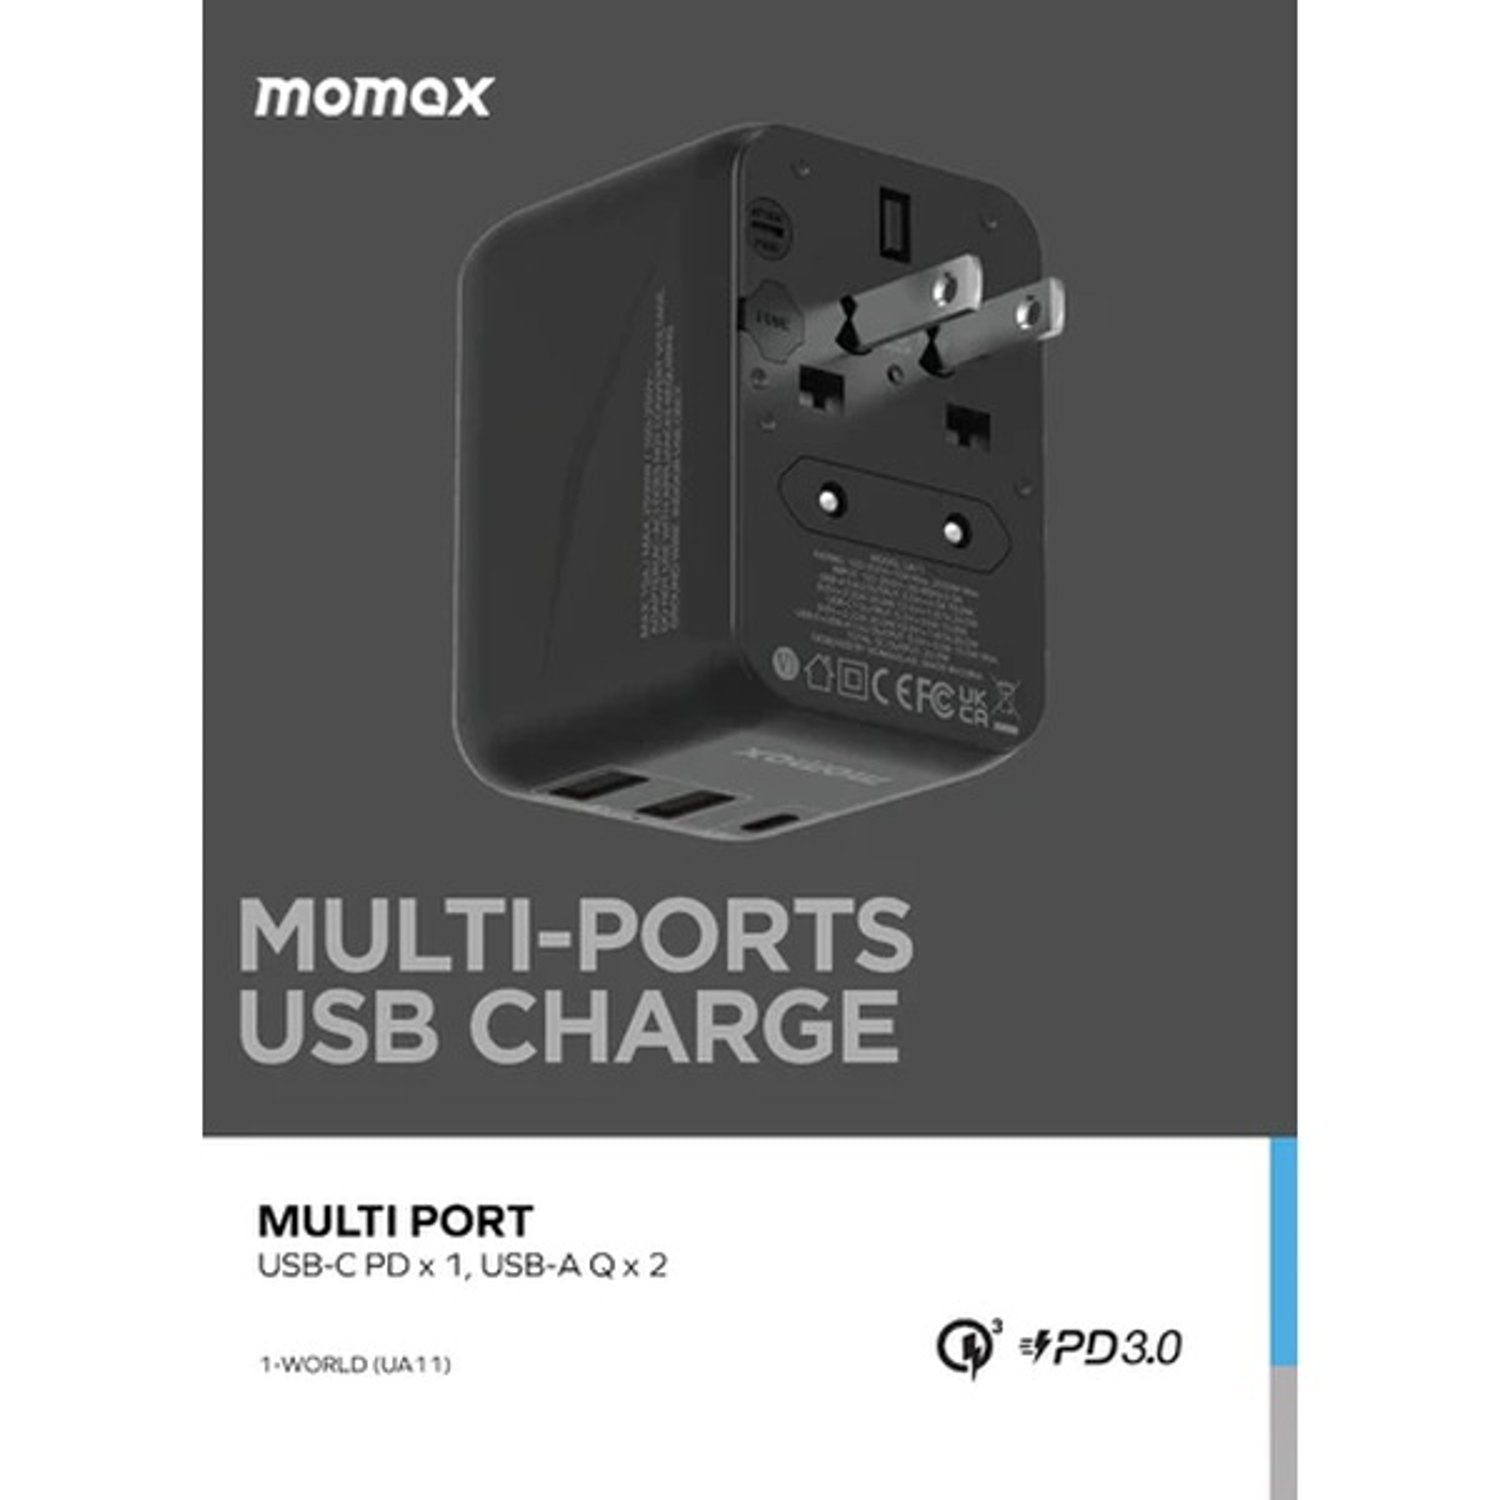 Momax 1-World 20W 3 Ports AC Travel Adapter - Black | UA11D, 32965712707836, Available at 961Souq